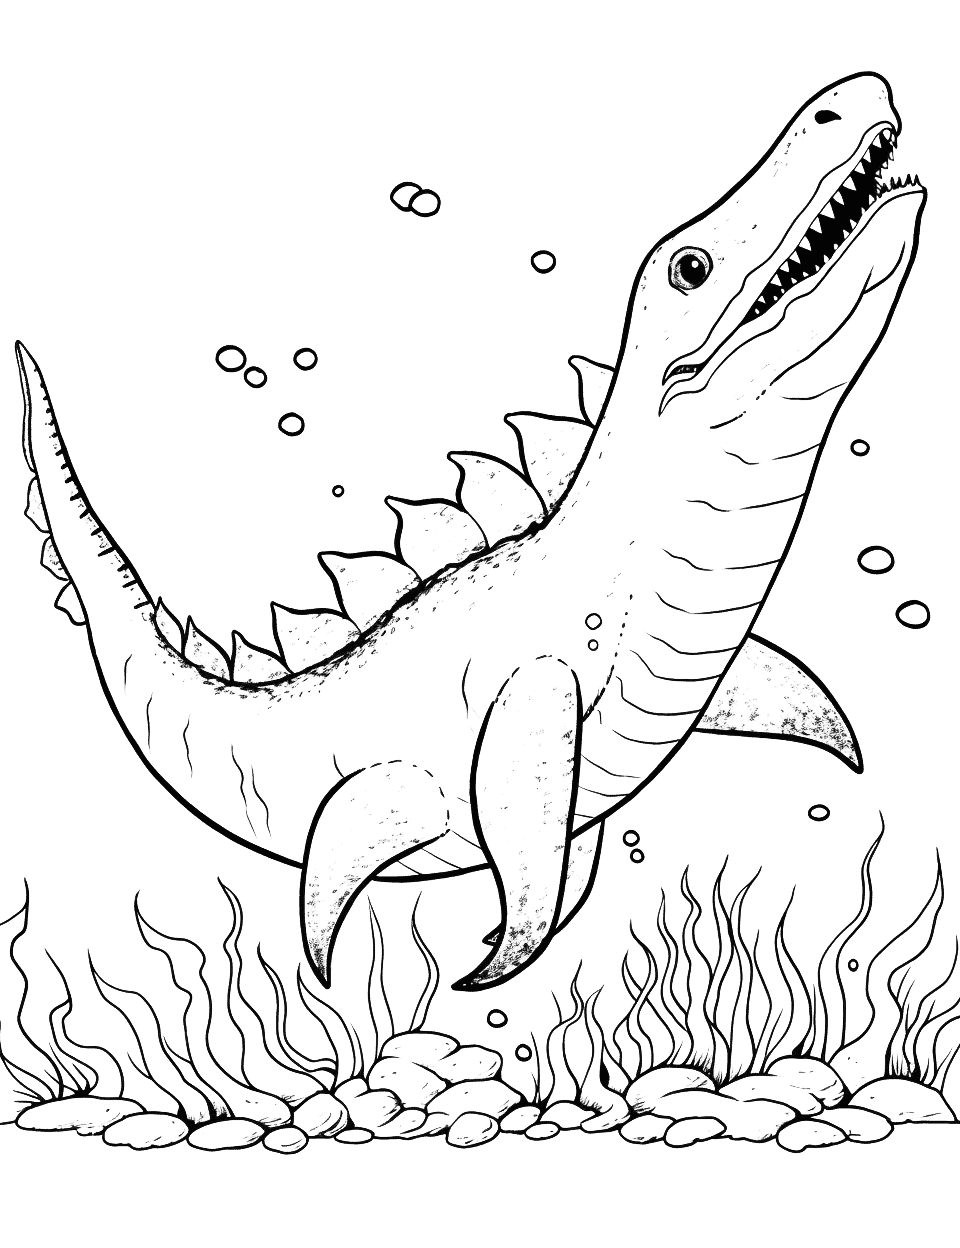 Mighty Mosasaurus Coloring Page - The underwater Mosasaurus chasing fish in the deep sea.